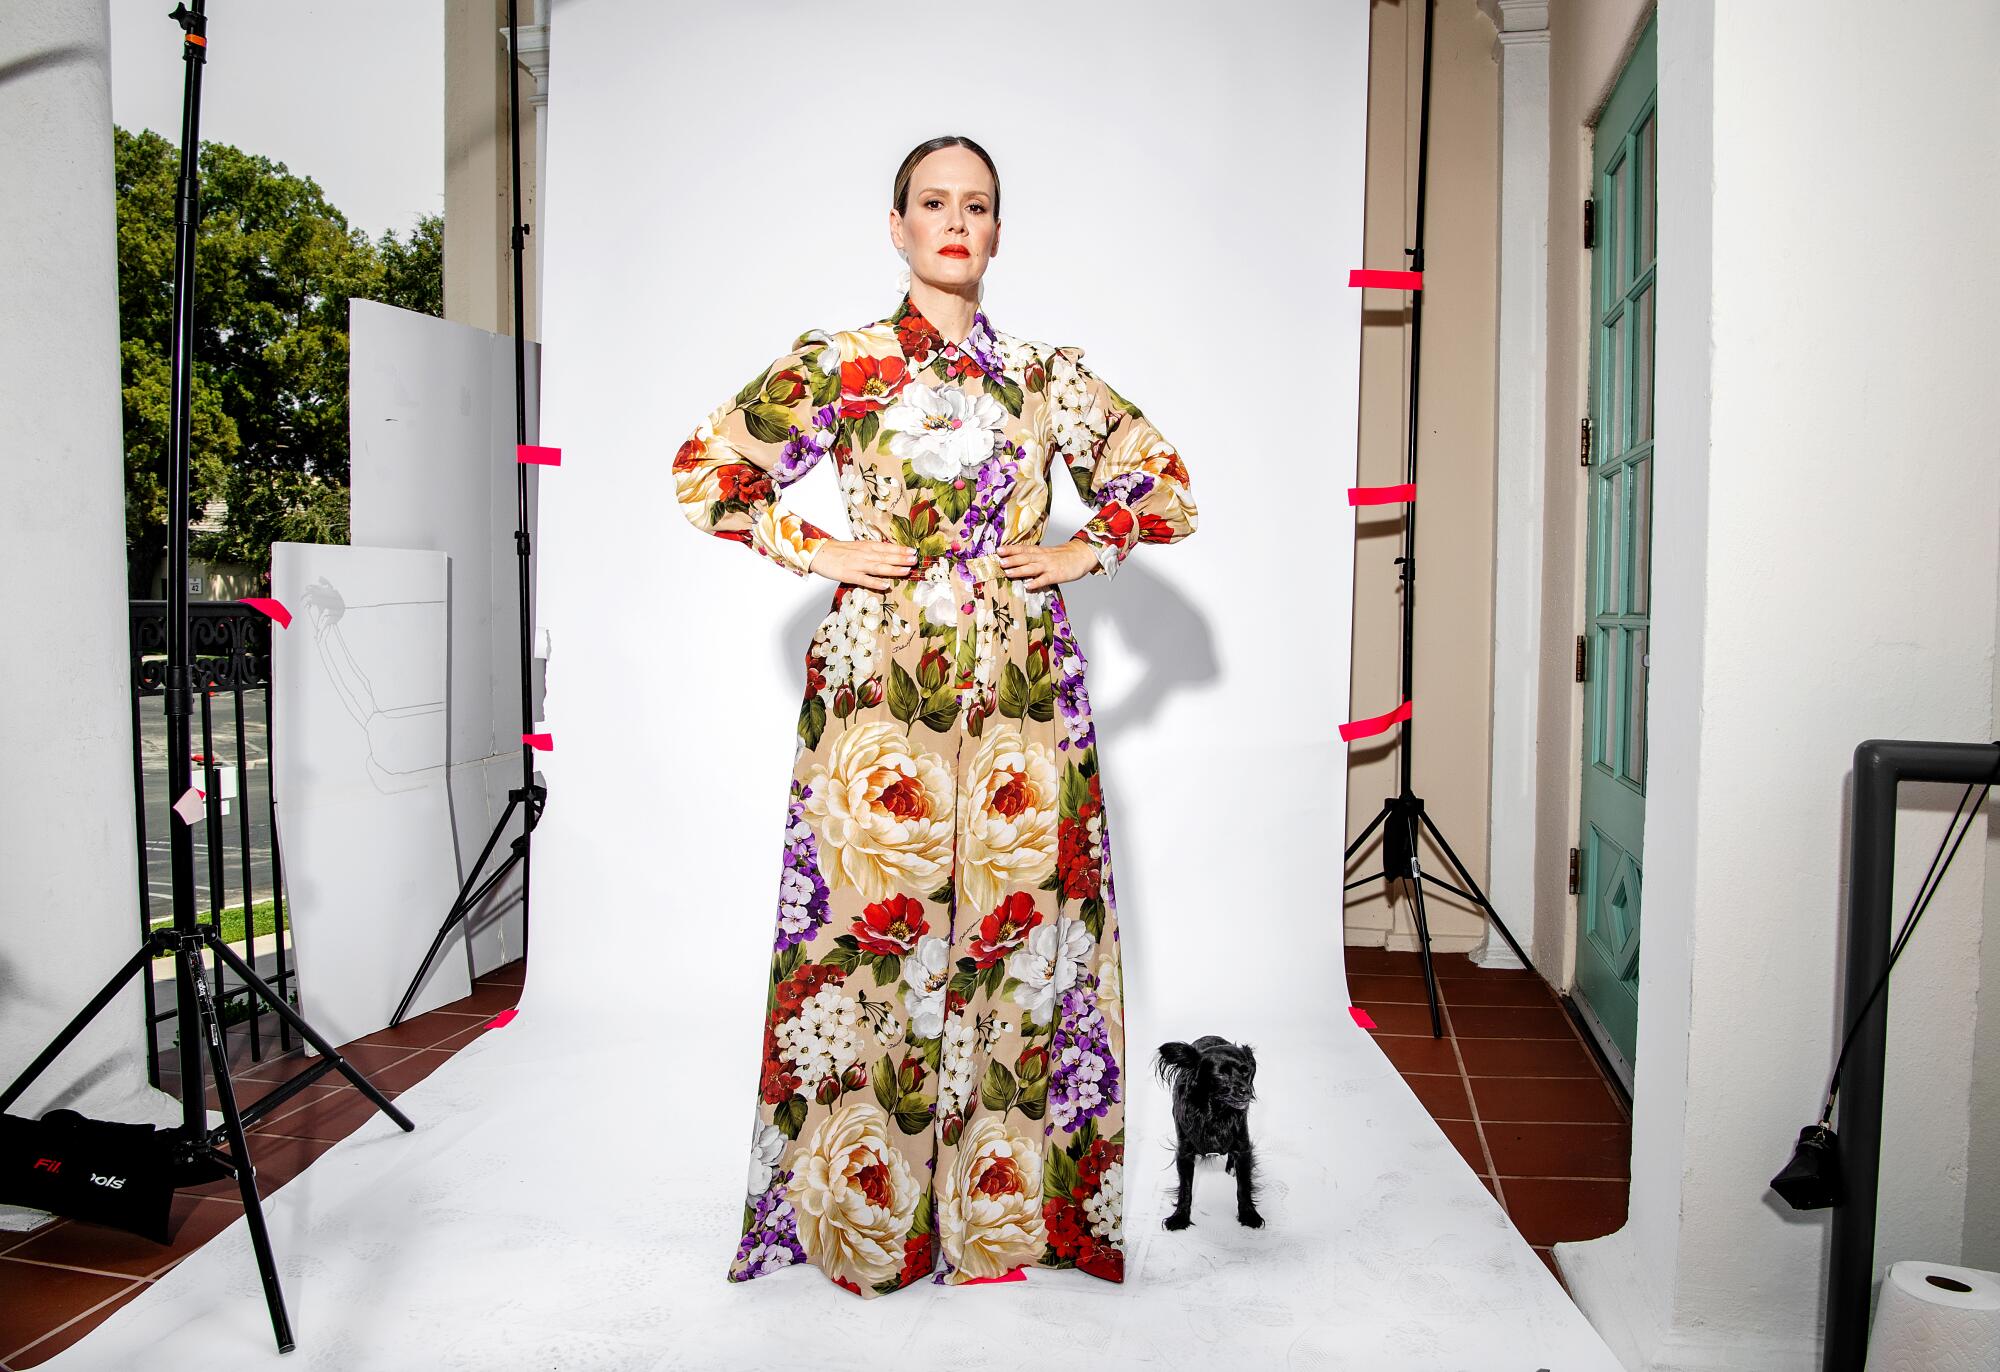 Sarah Paulson stands wearing a colorful floor length flowered outfit with her rescue dog Winnie next to her.